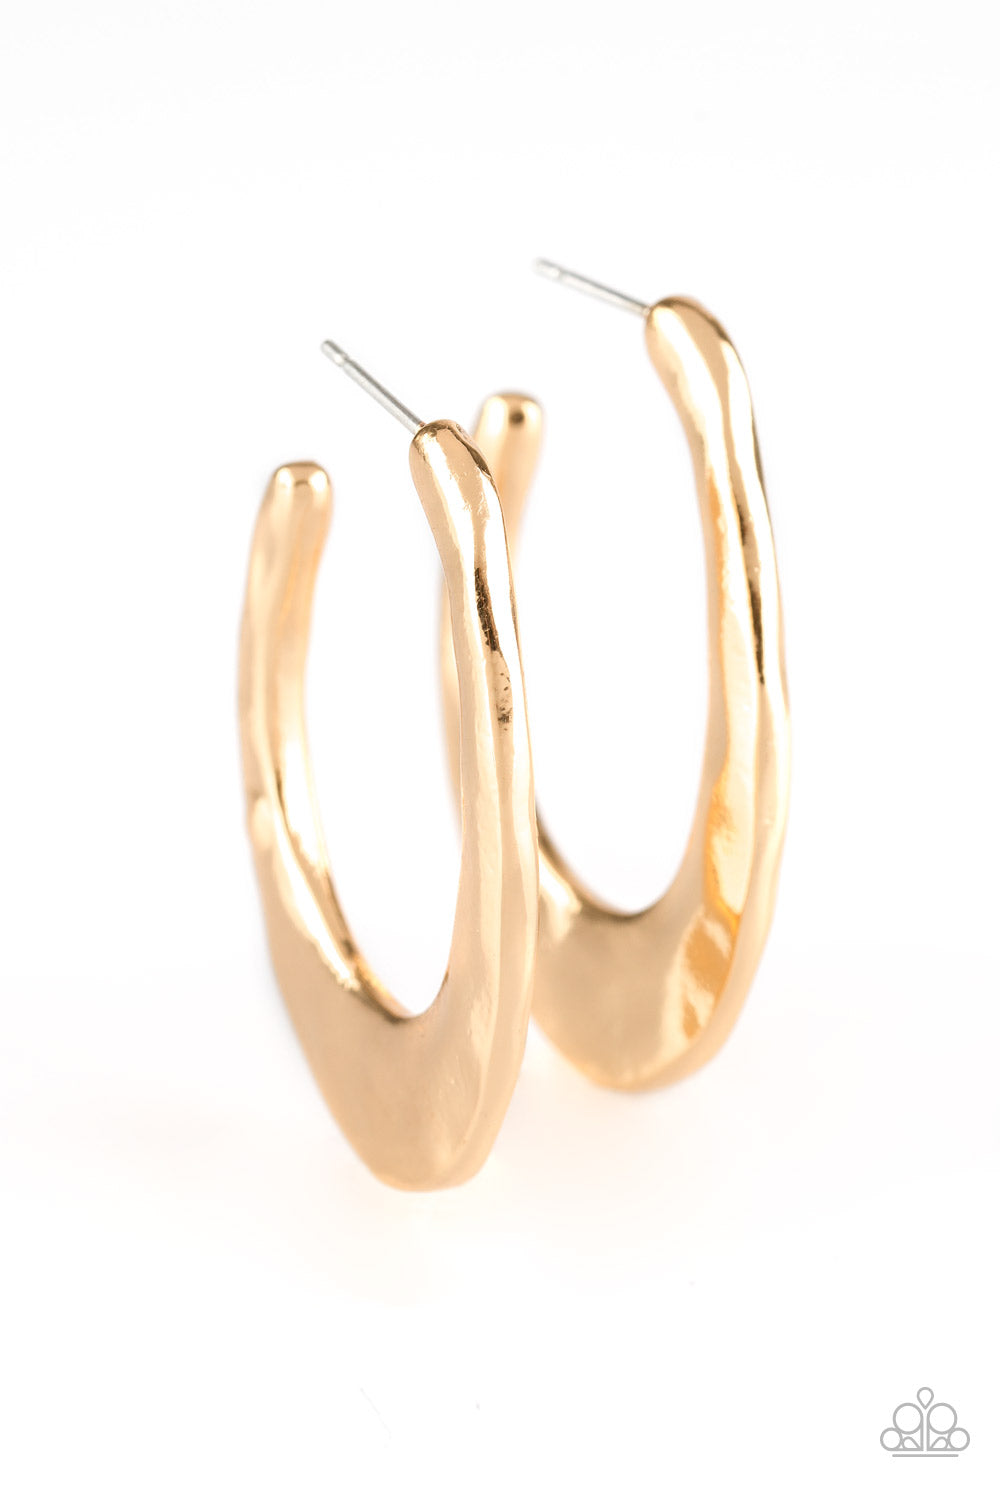 Paparazzi Accessories - HOOP Me Up! - Gold Earrings